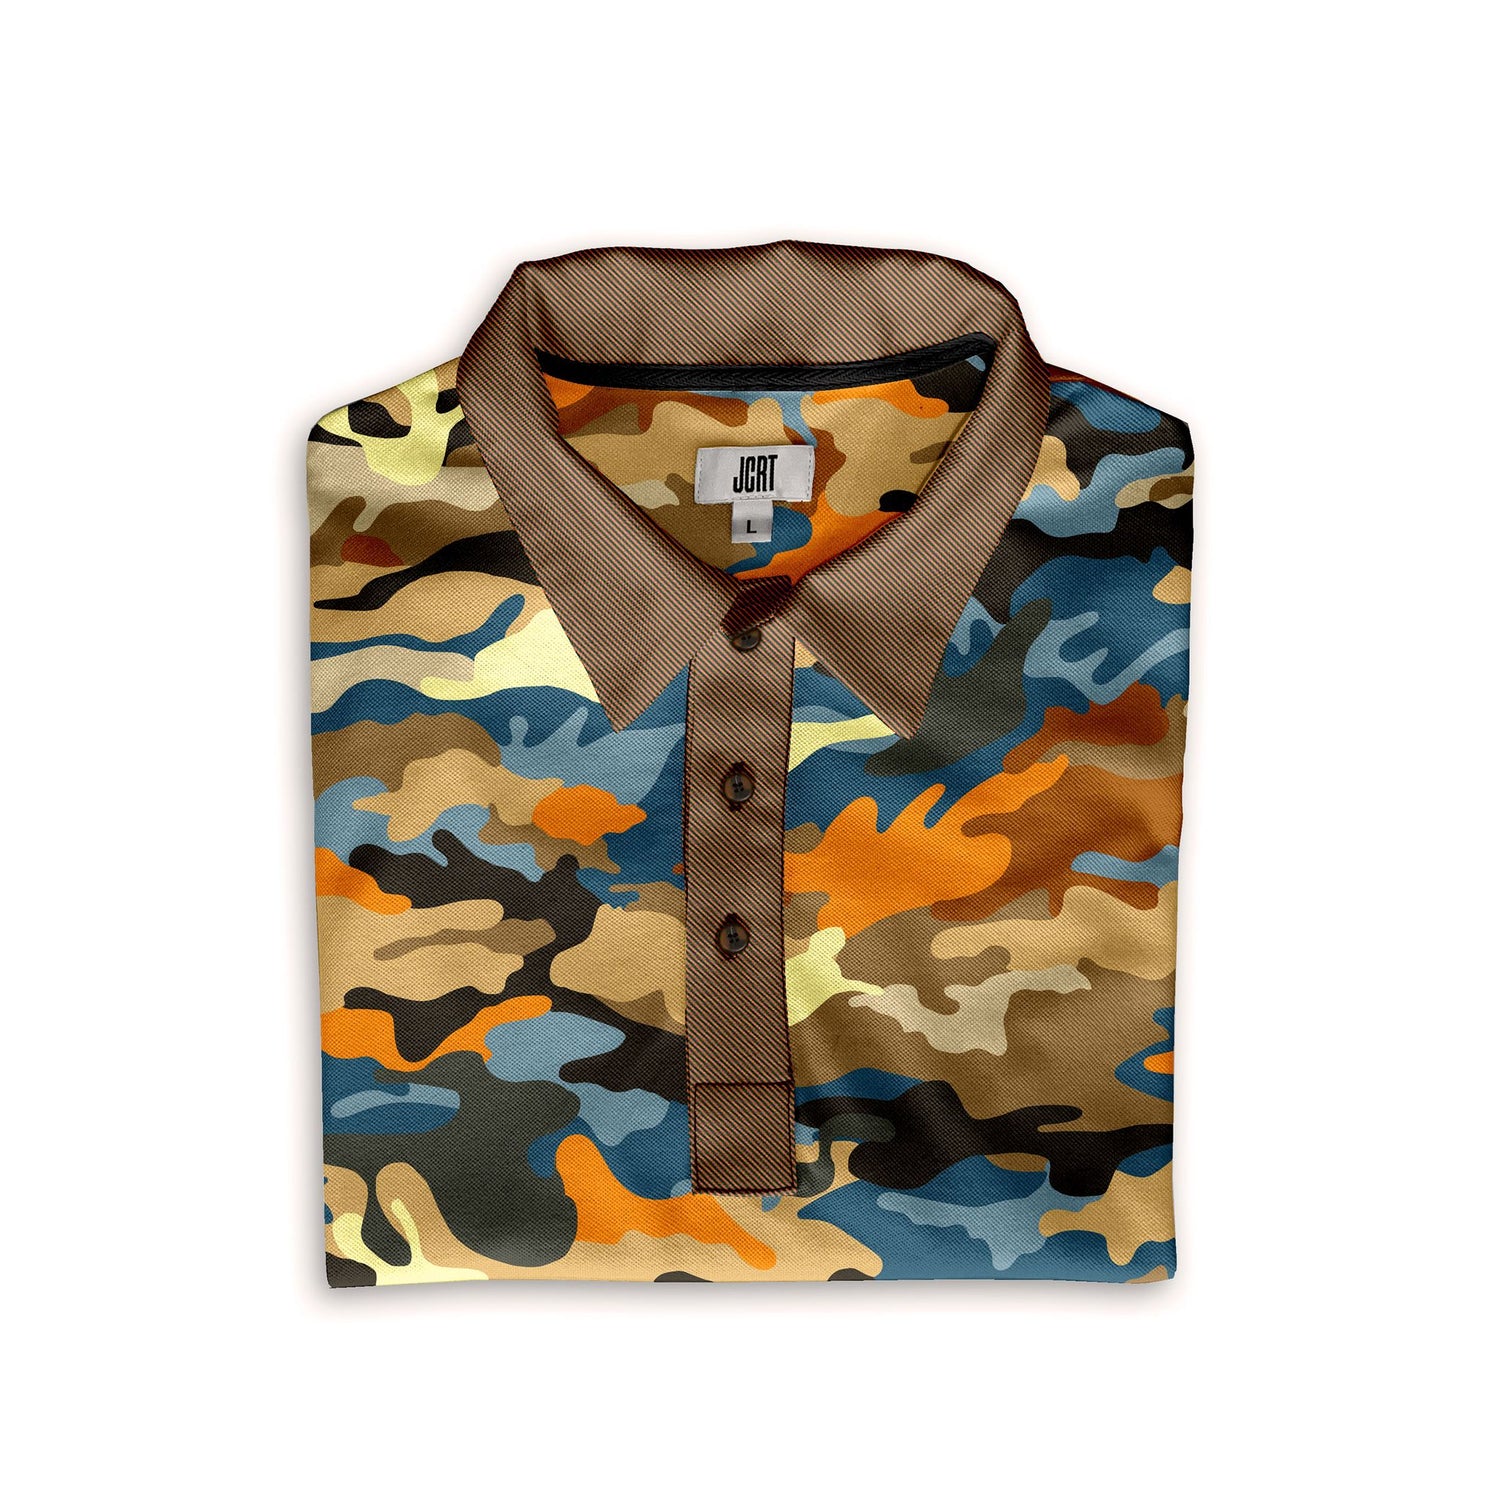 The Modern Life is Rubbish Camouflage Polo Shirt